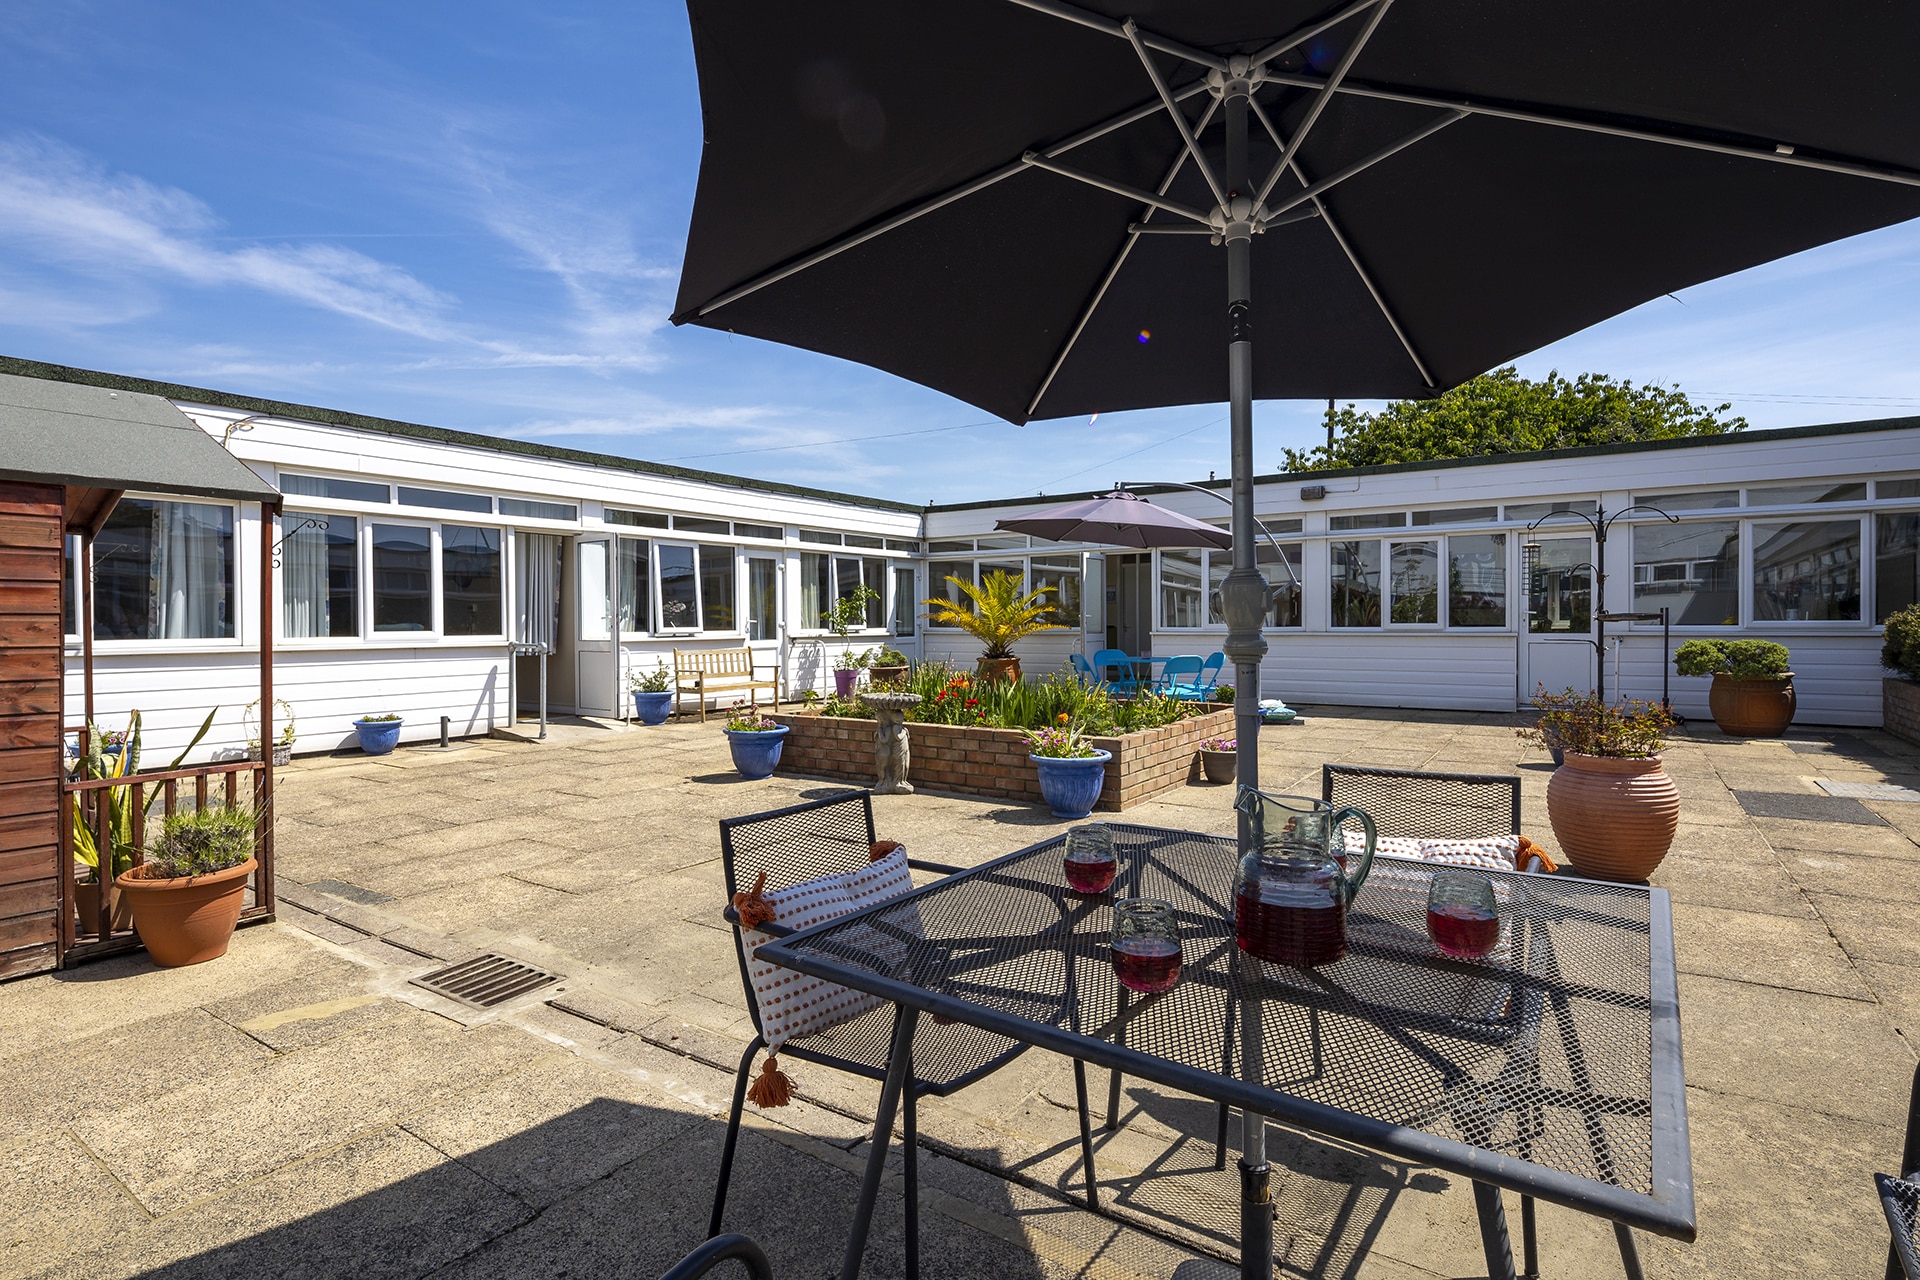 Courtyard area at Cavell House Care Home in Shoreham-by-Sea.